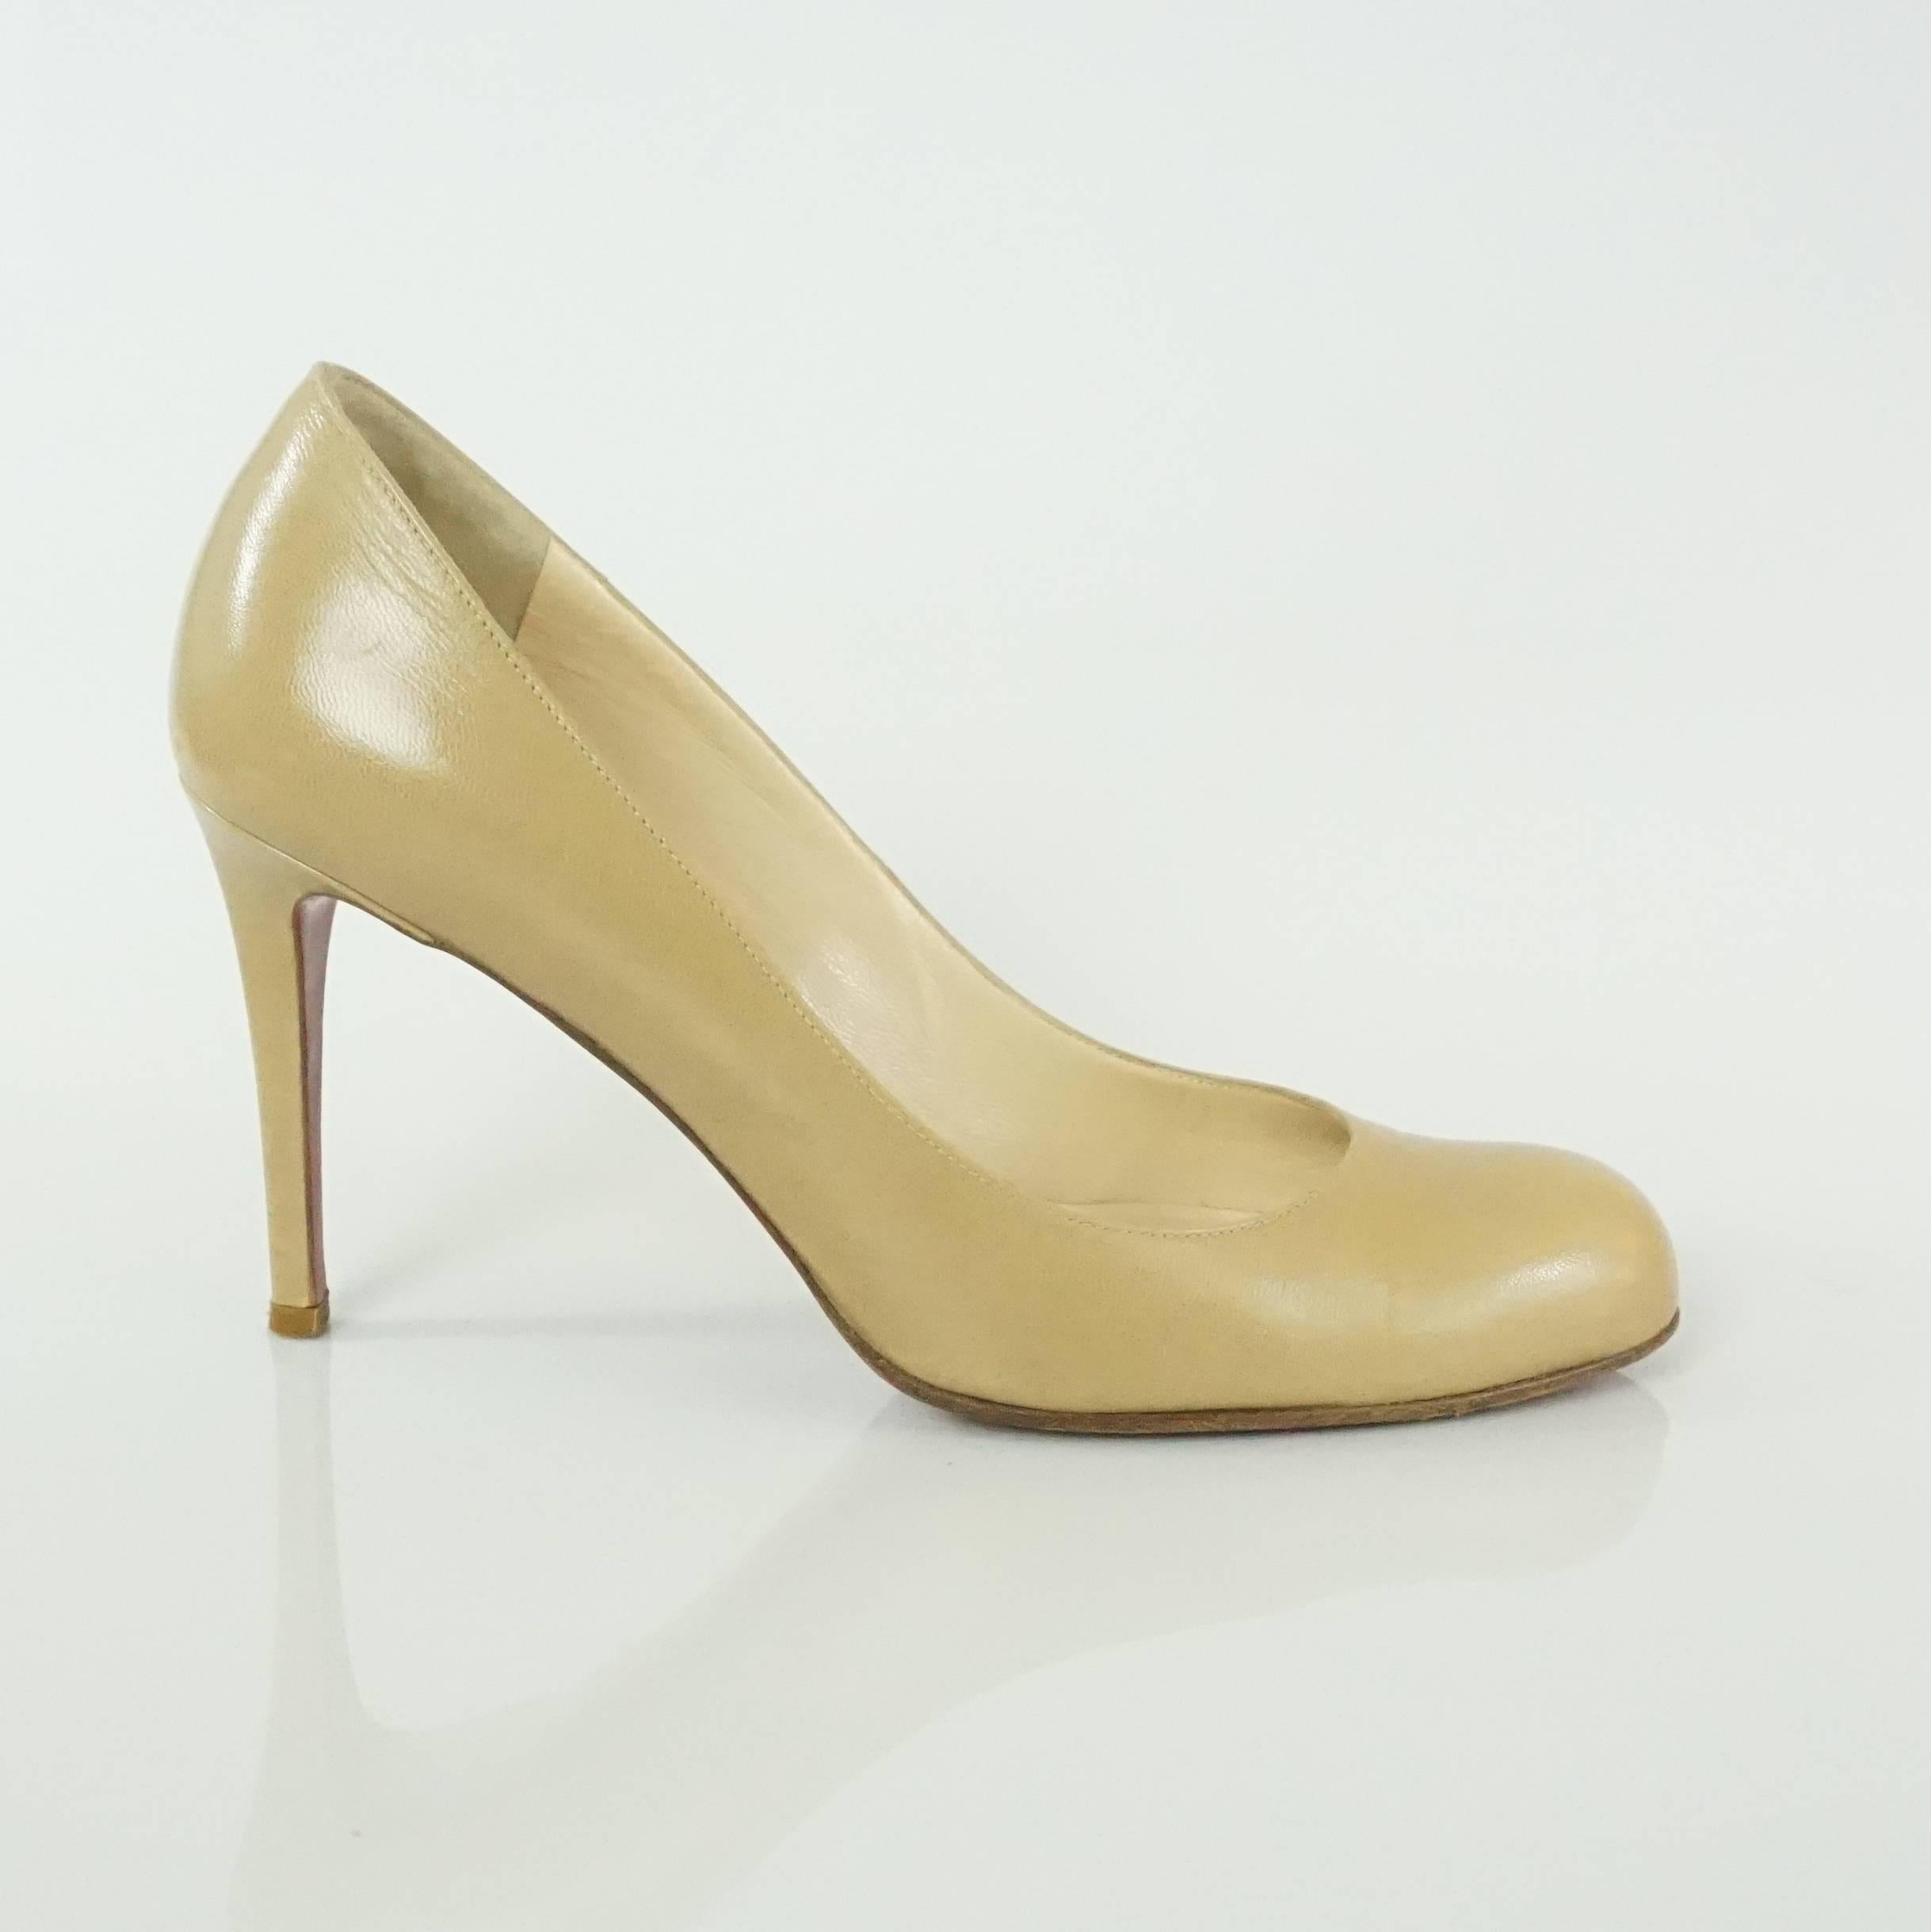 These Louboutin heels are great for any wardrobe! They are nude in color and leather. They are in good condition with some wear on the bottom and minor wear on the leather.

Measurement
Heel: 3.5